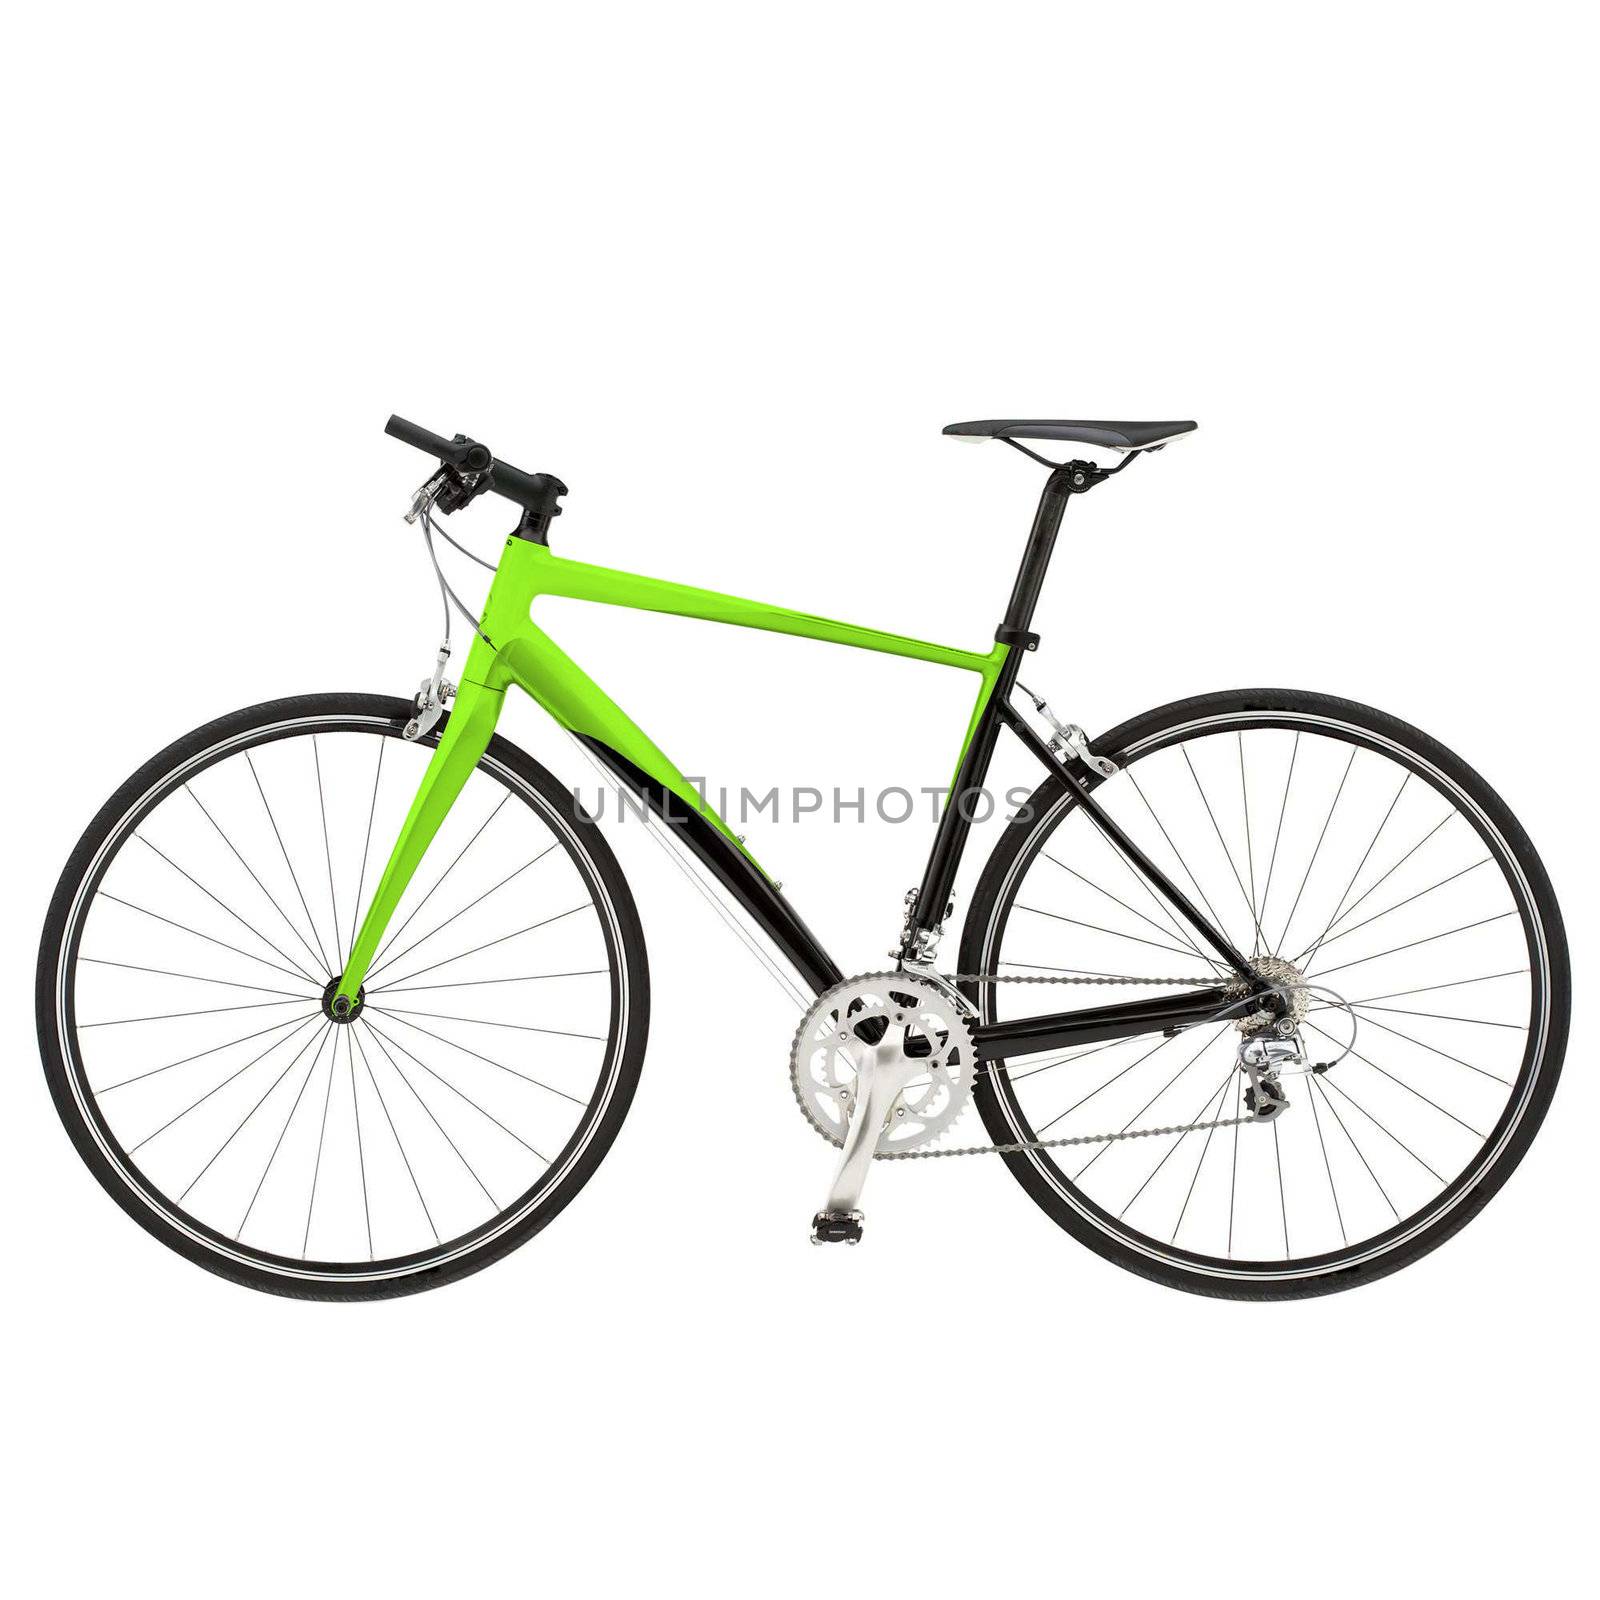 Green bike detail isolated on white background